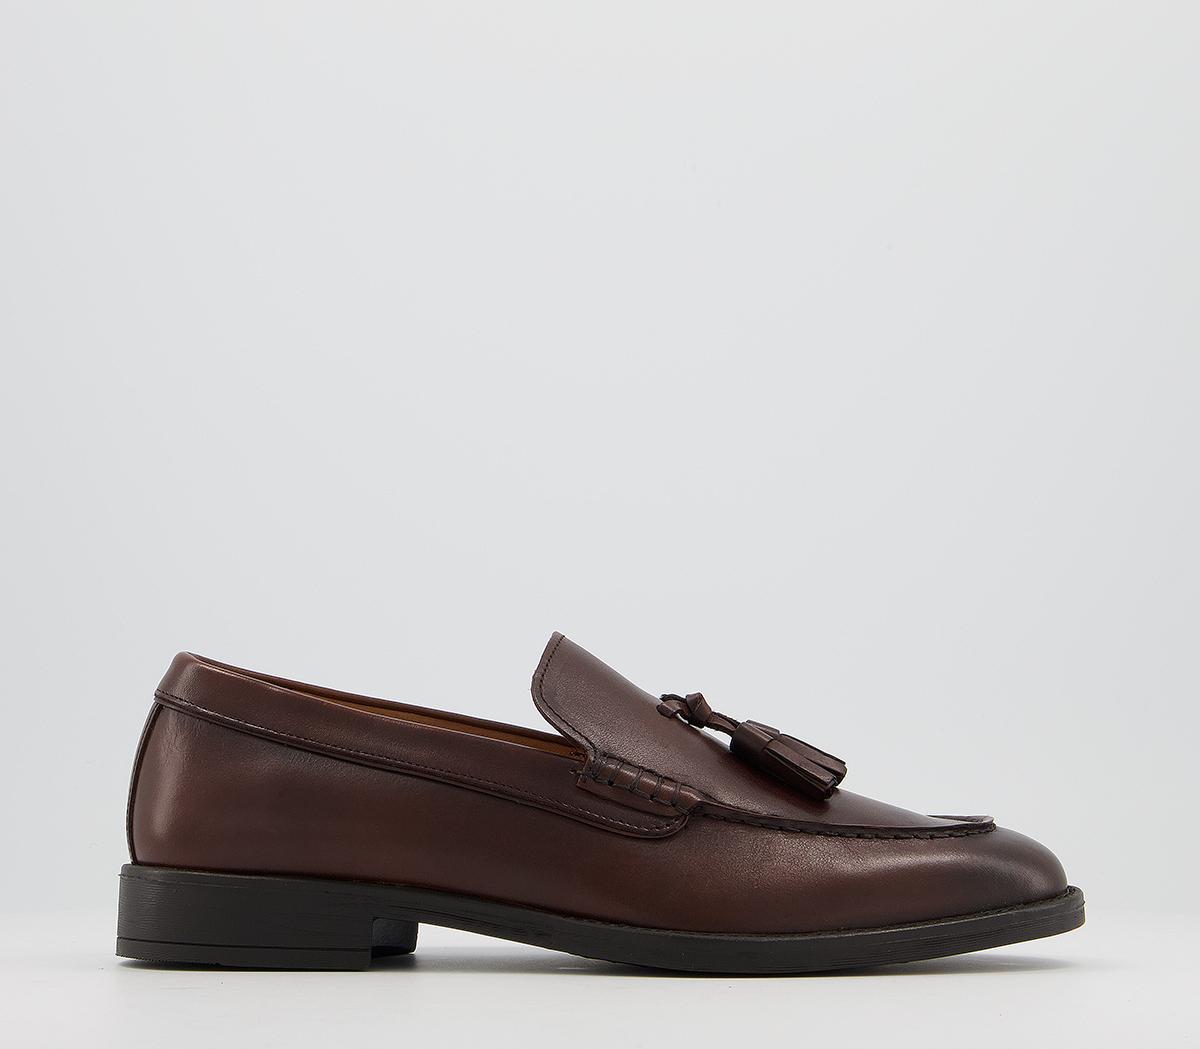 OFFICEMaverick LoafersBrown Leather